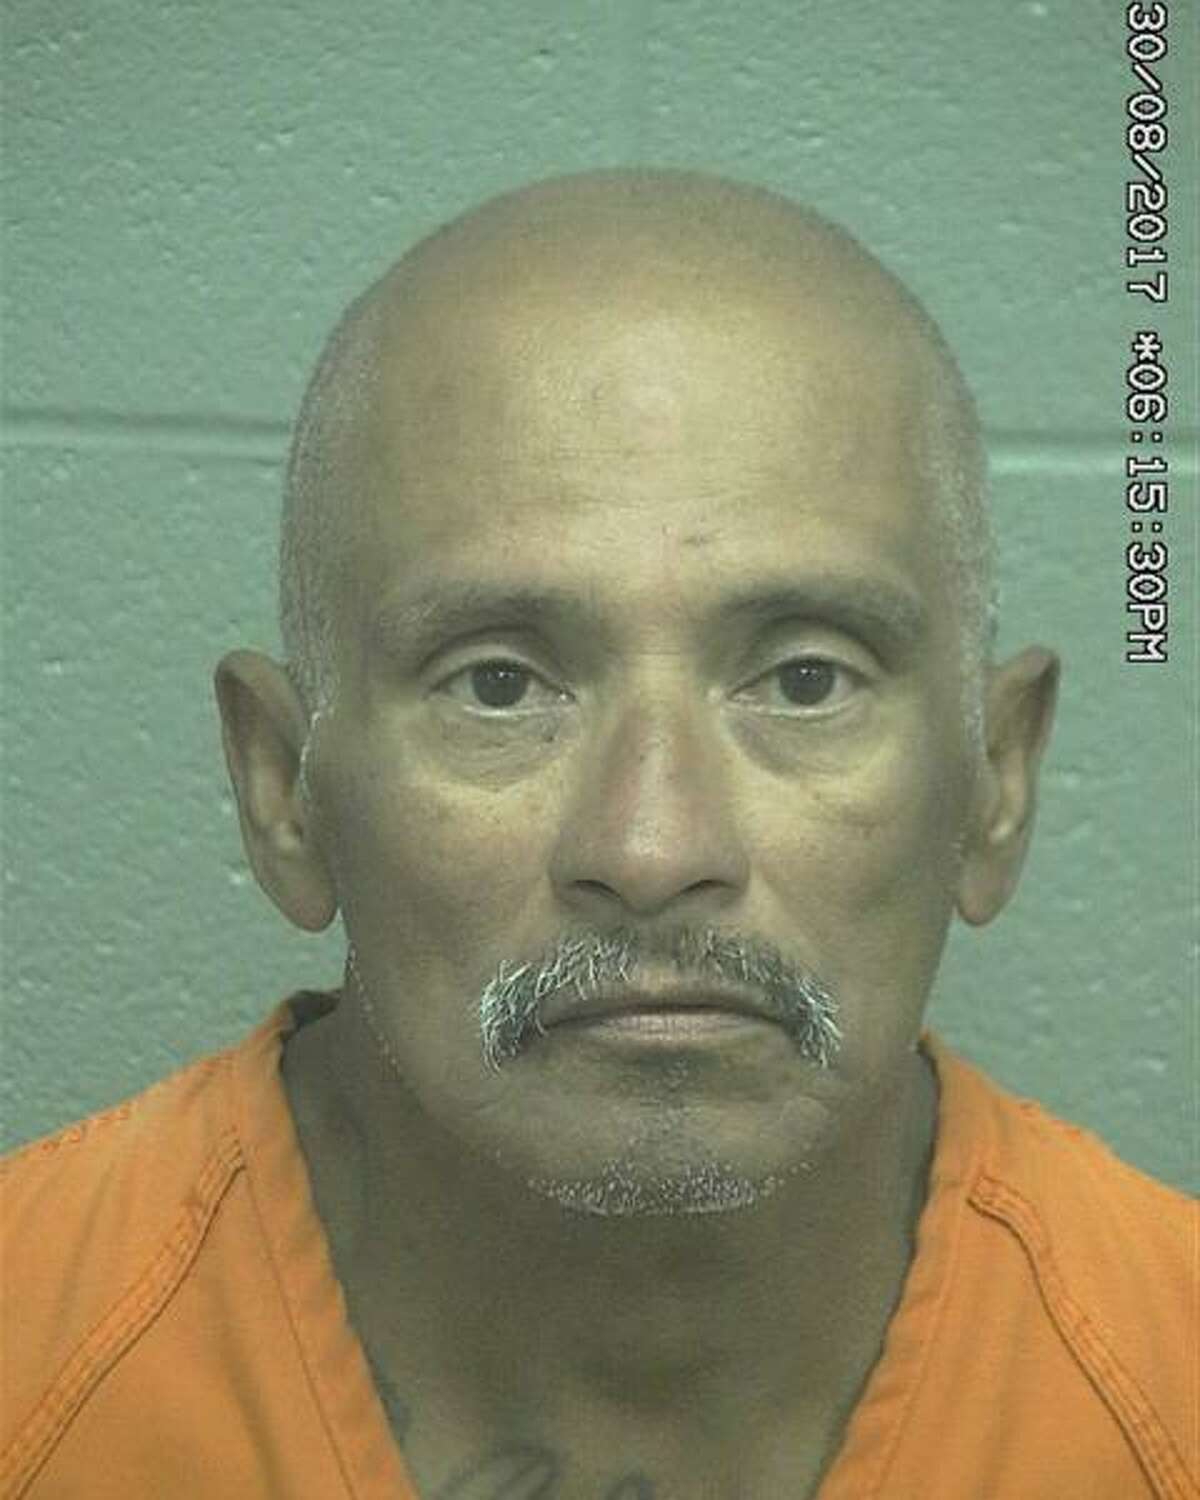 Rene Jose Marquez, 51, was arrested August 29 after allegedly brandishing a knife, according to court documents.